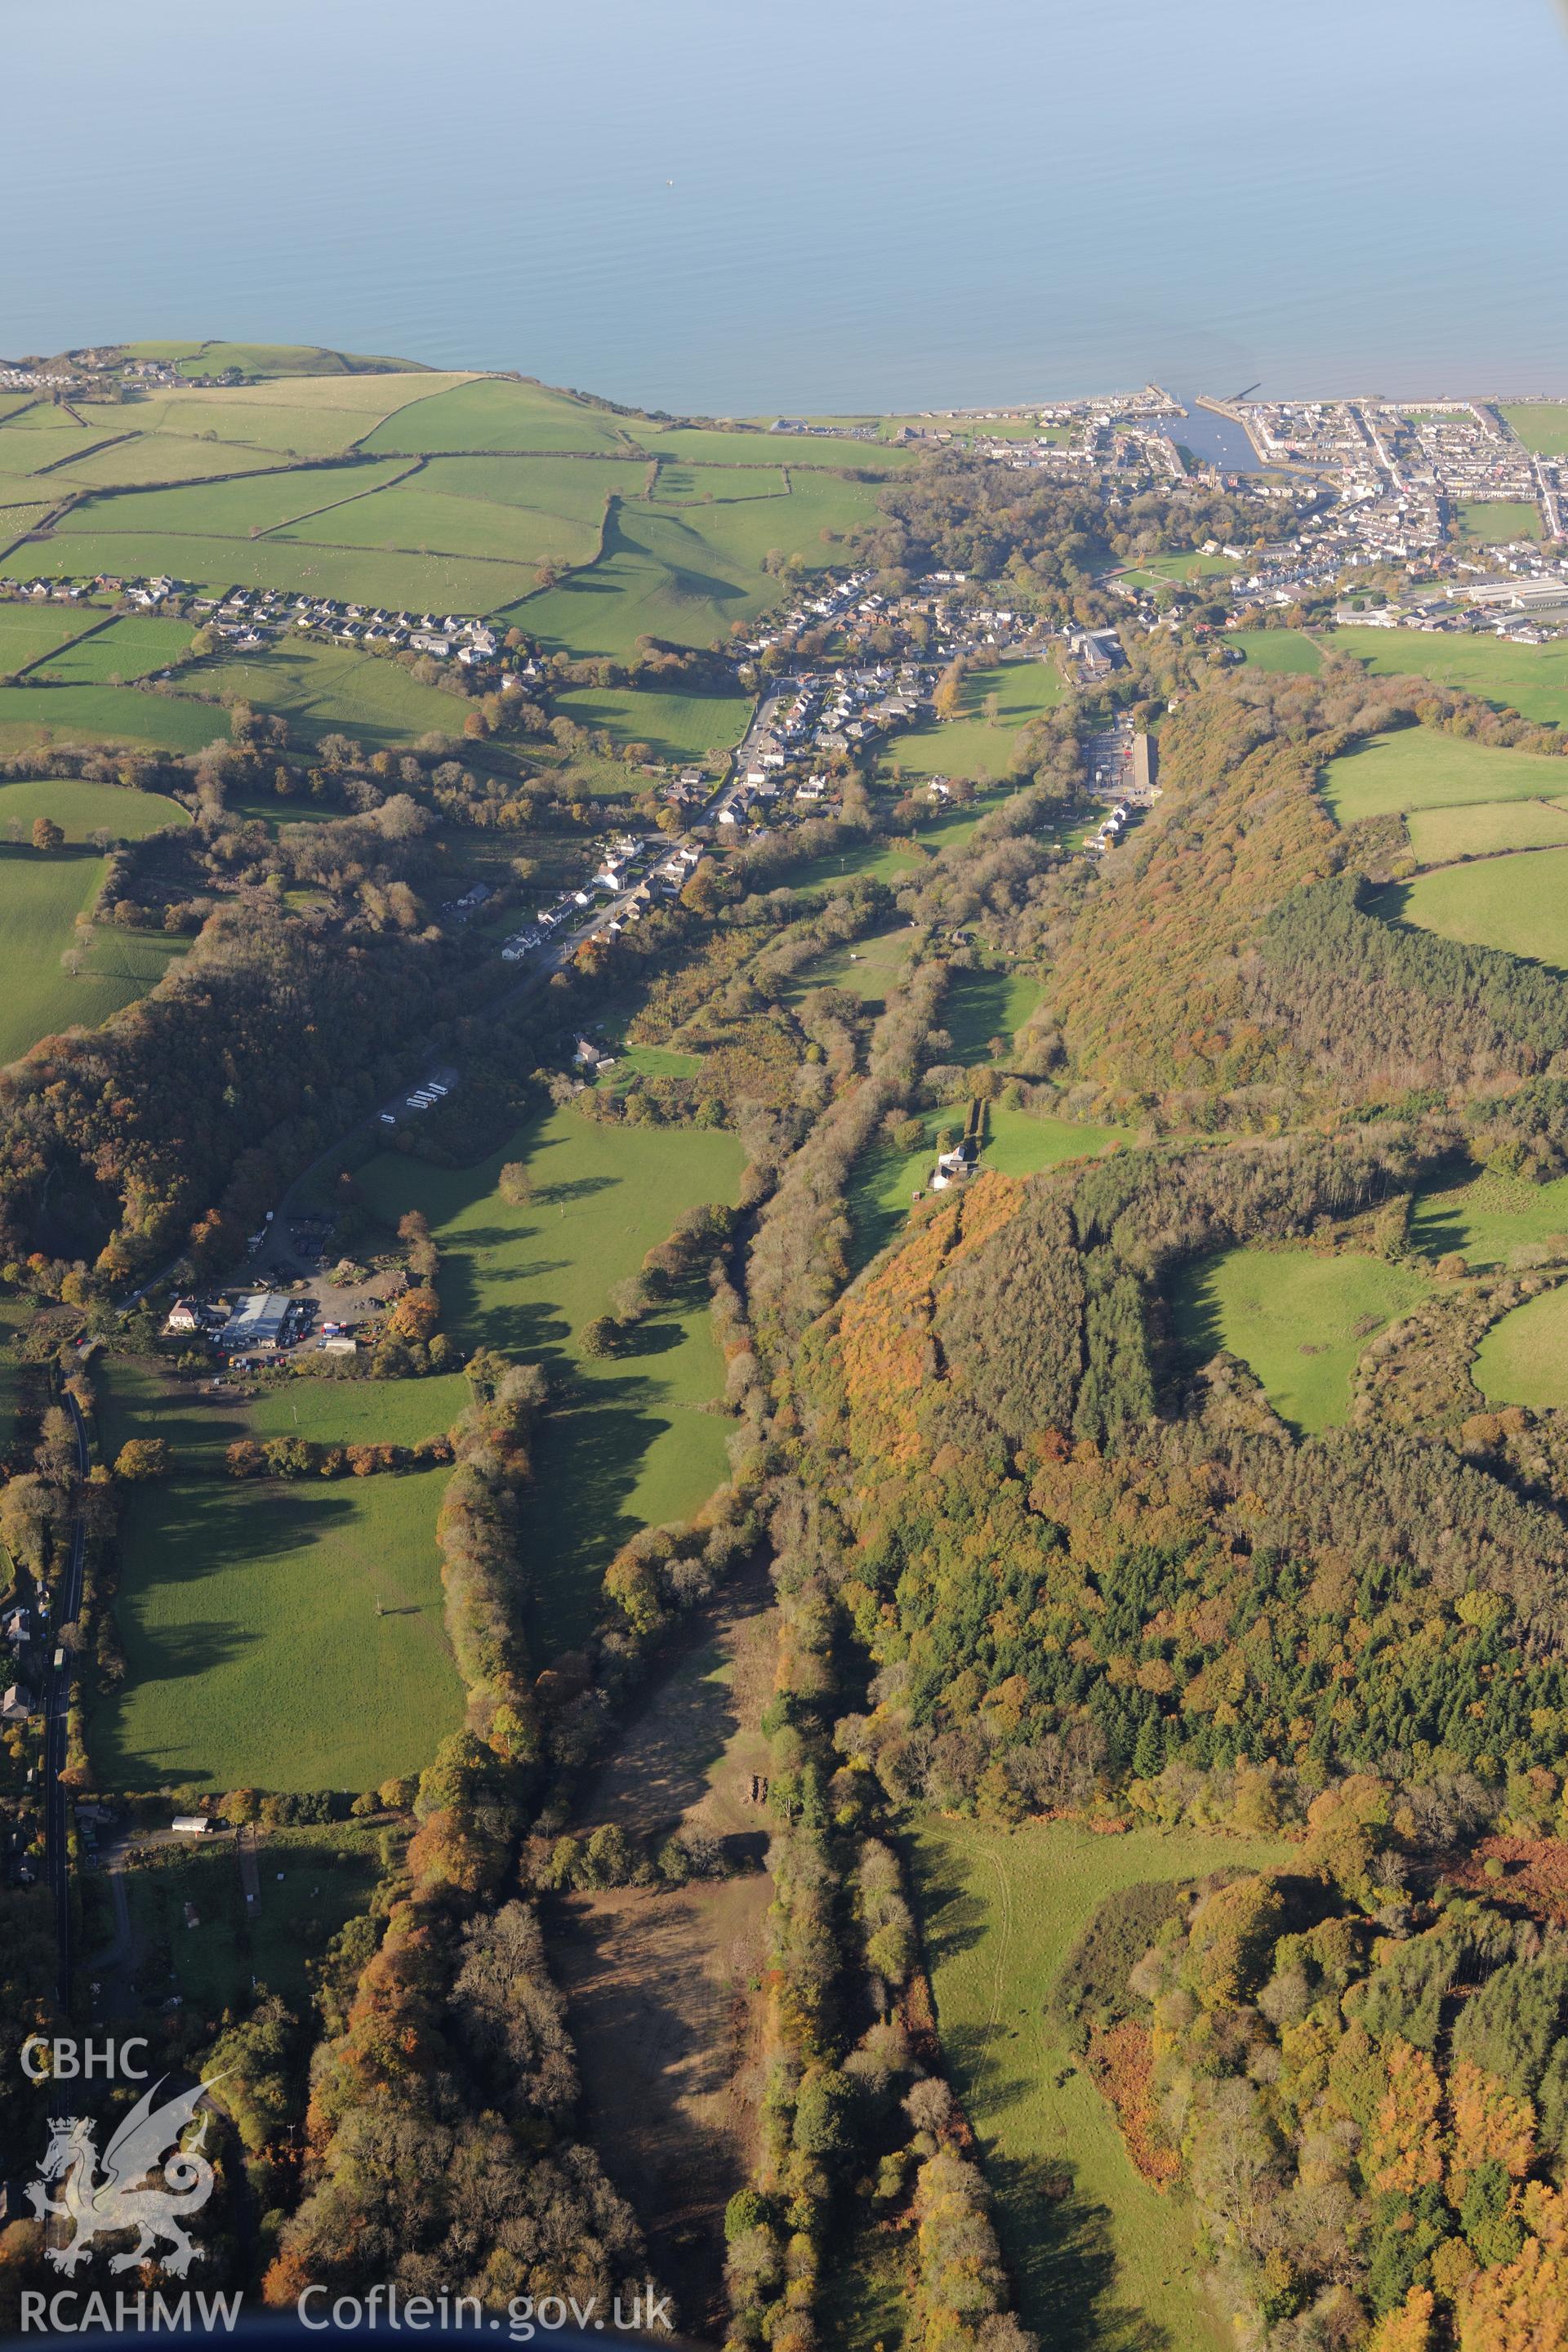 A view of Aberaeron taken from the south east and looking towards Cardigan Bay.  Oblique aerial photograph taken during the Royal Commission's programme of archaeological aerial reconnaissance by Toby Driver on 2nd November 2015.